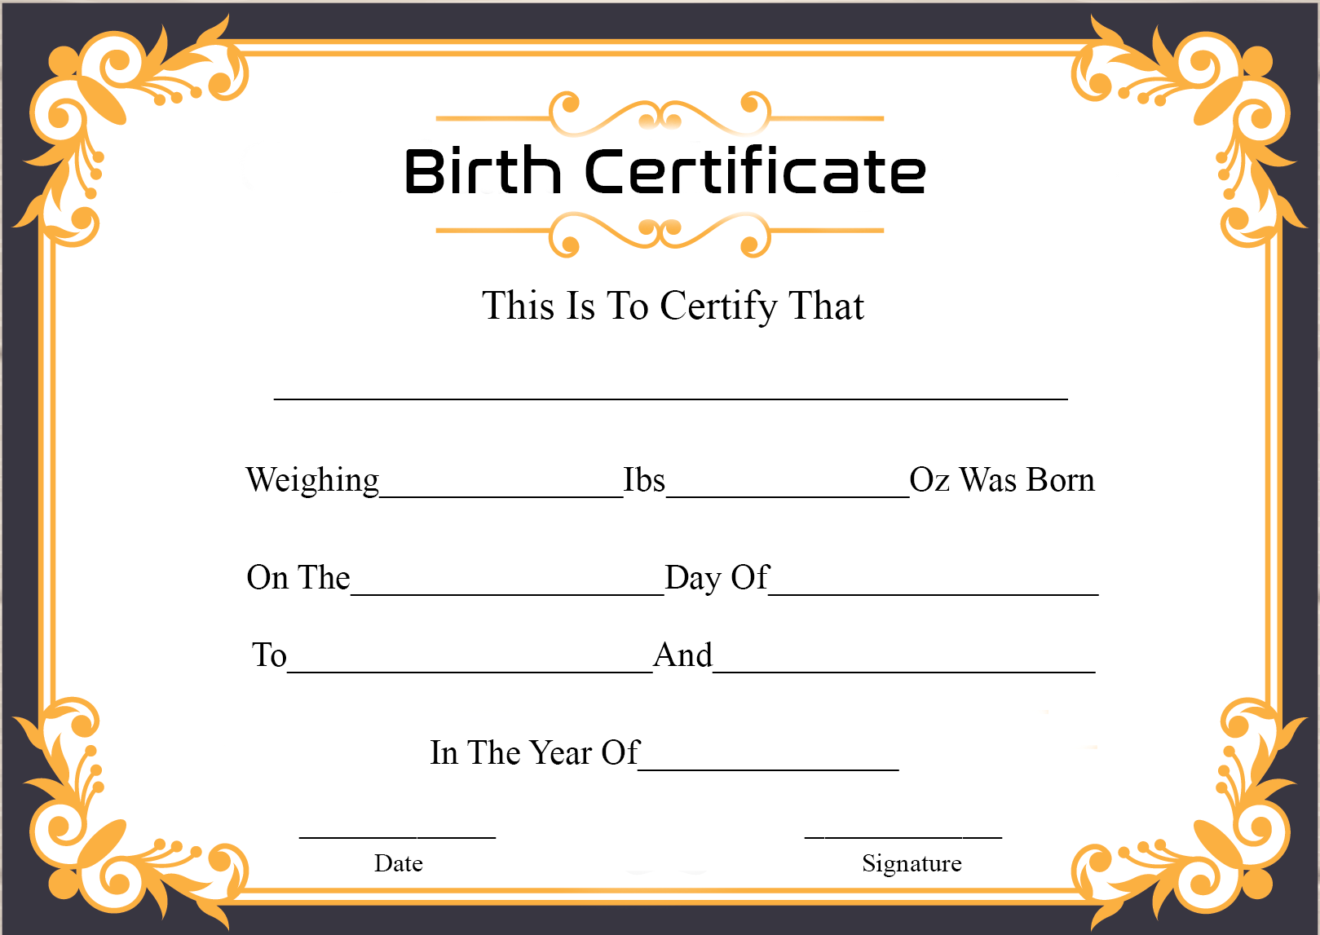 can my baby travel with birth certificate